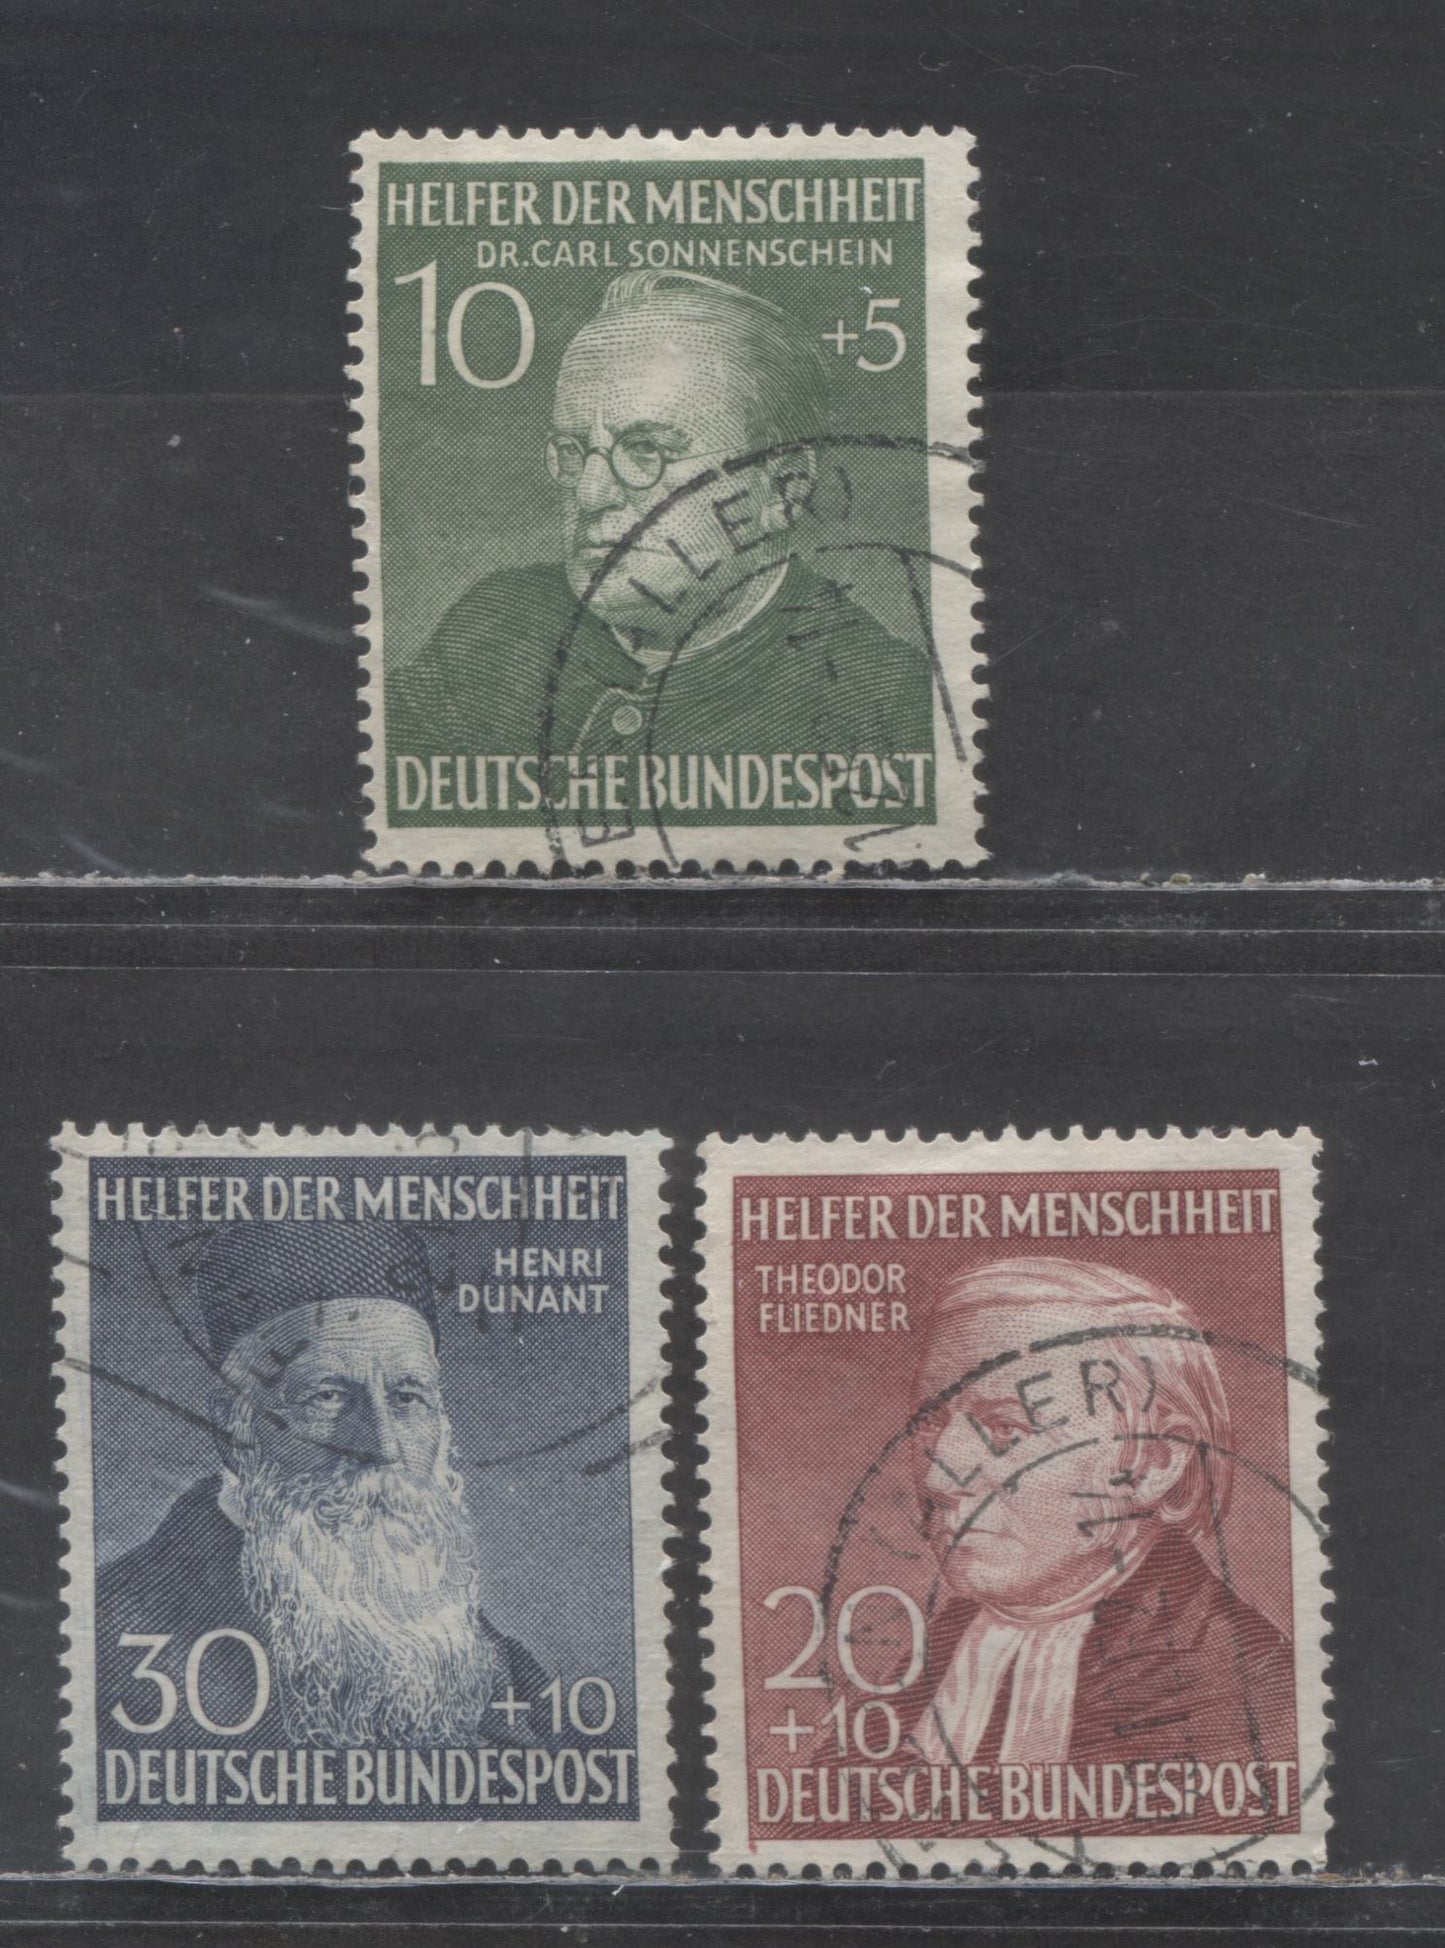 Lot 31 Germany SC#B328-B330 1952 Portrait Semi Postals, 3 Fine/Very Fine Used Singles, Click on Listing to See ALL Pictures, Estimated Value $50